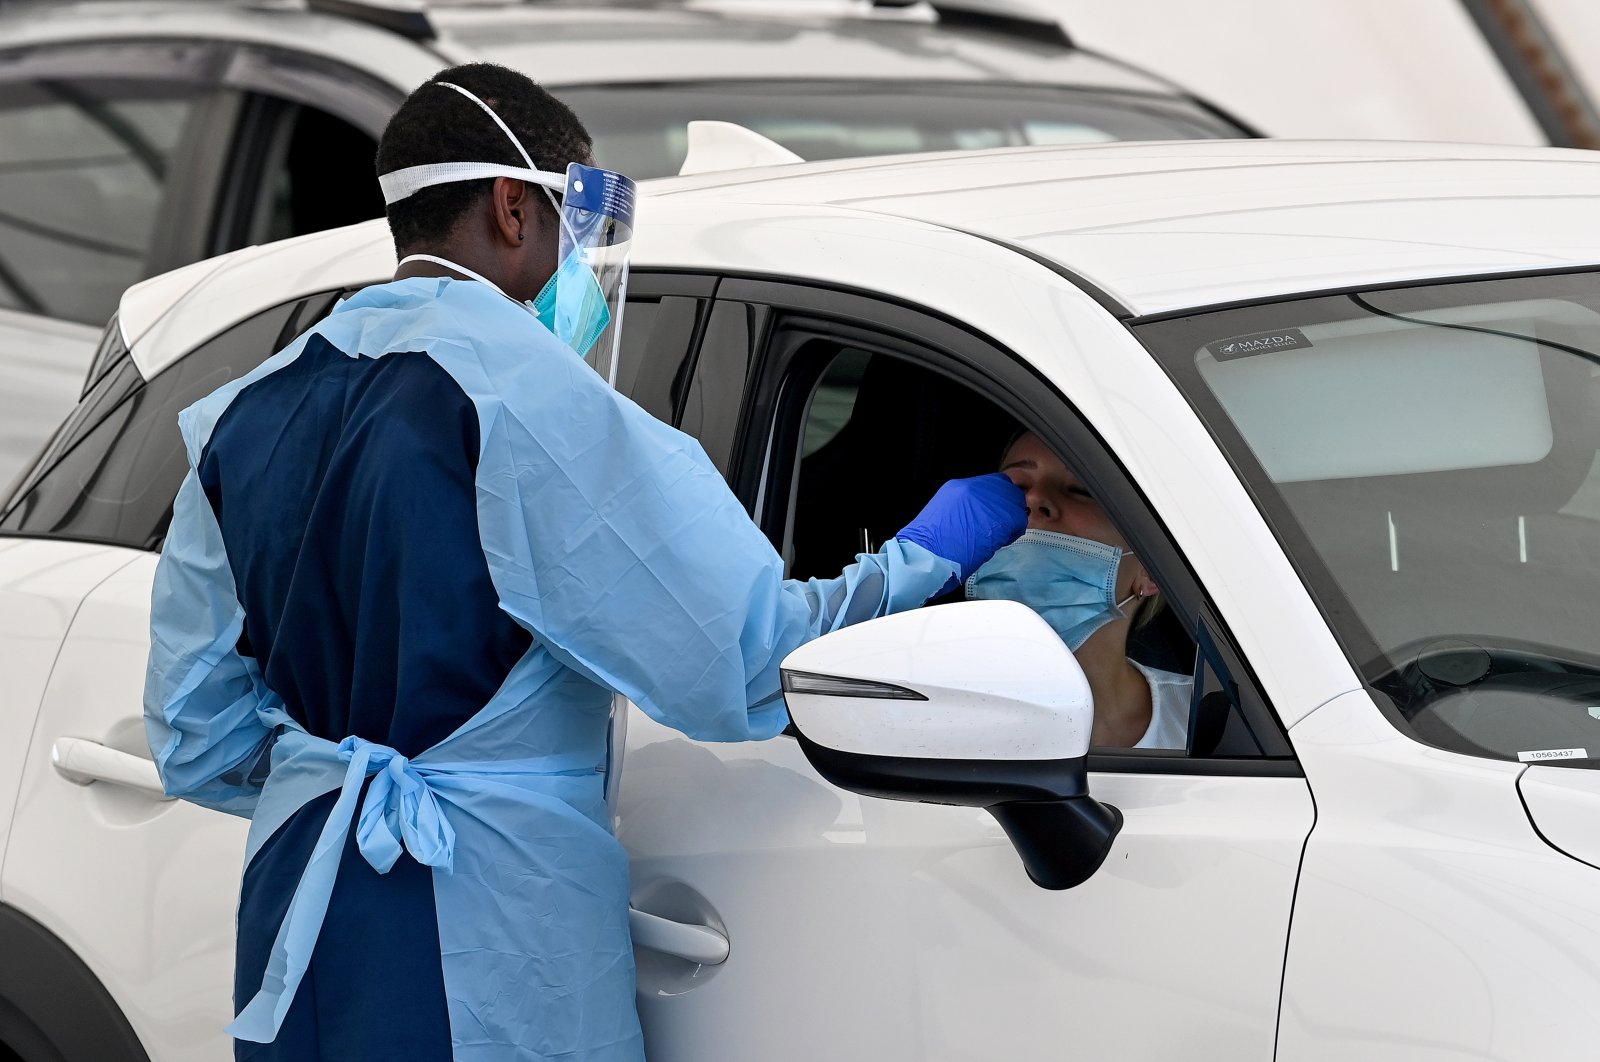 Healthcare workers administer COVID-19 tests at the St Vincent’s Hospital drive-through testing clinic at Bondi Beach in Sydney, Australia, Dec. 19, 2021. (EPA Photo)